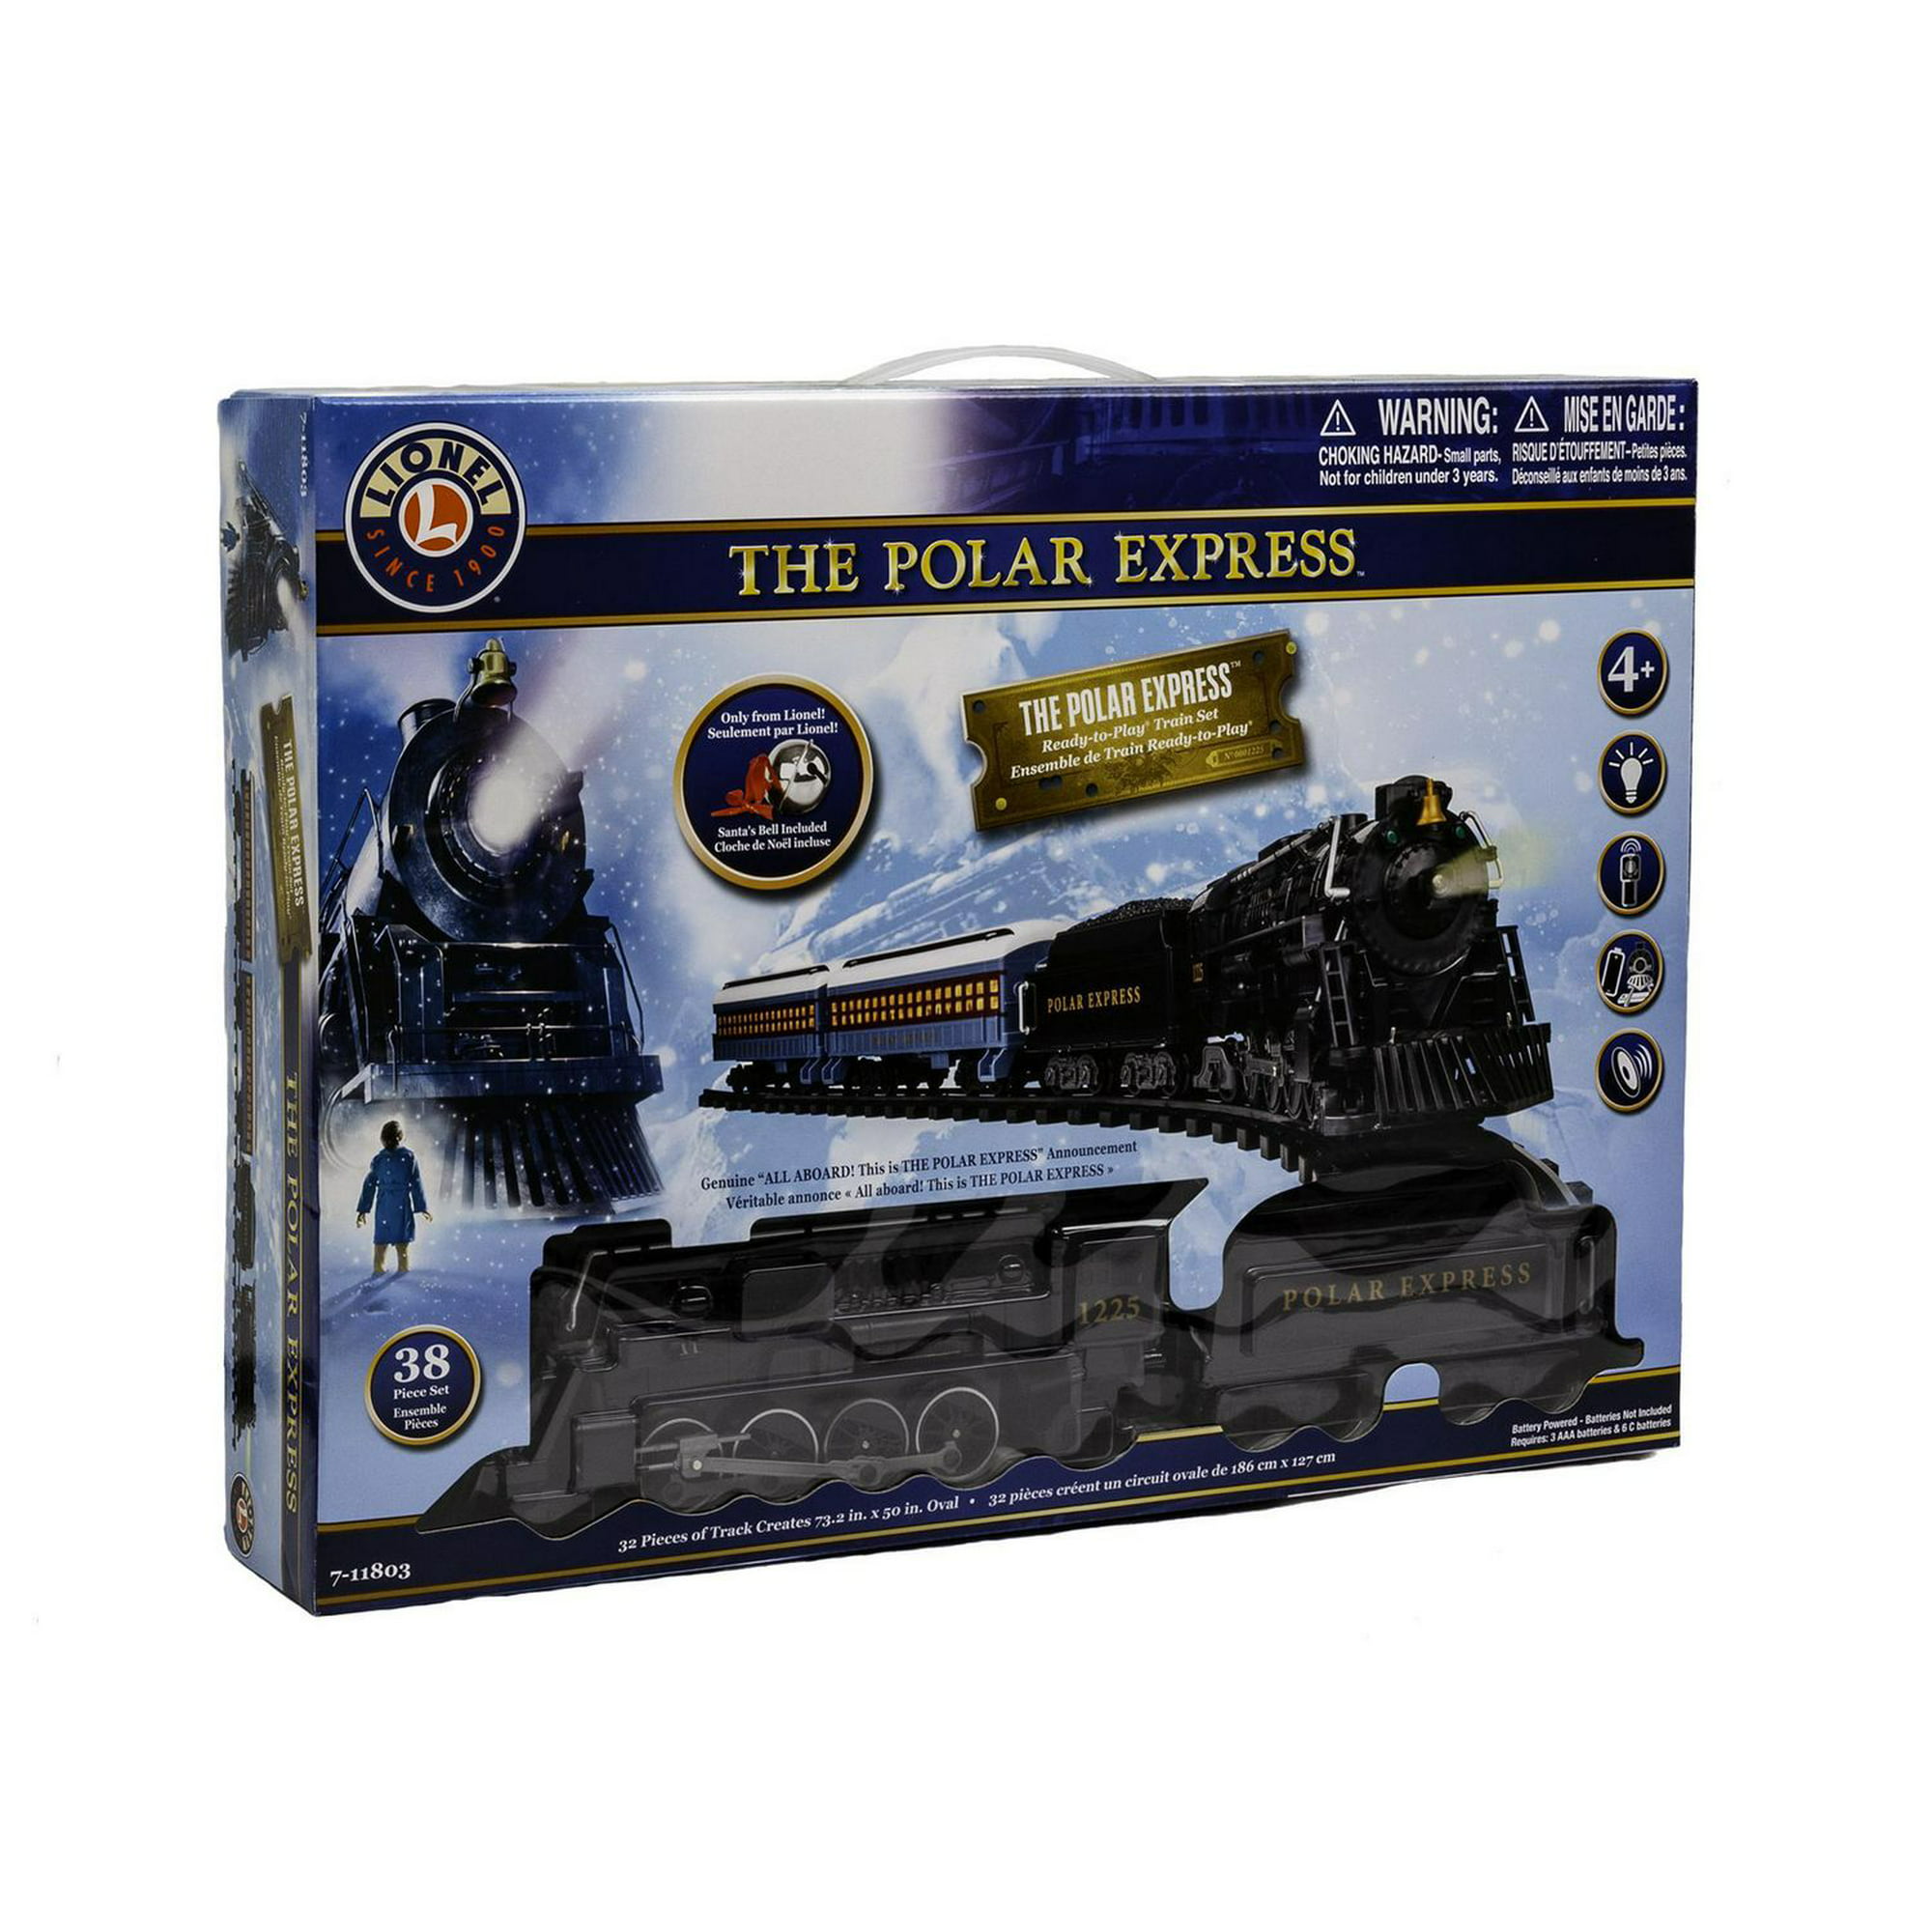 Lionel The Polar Express Ready-To-Play Train Set 